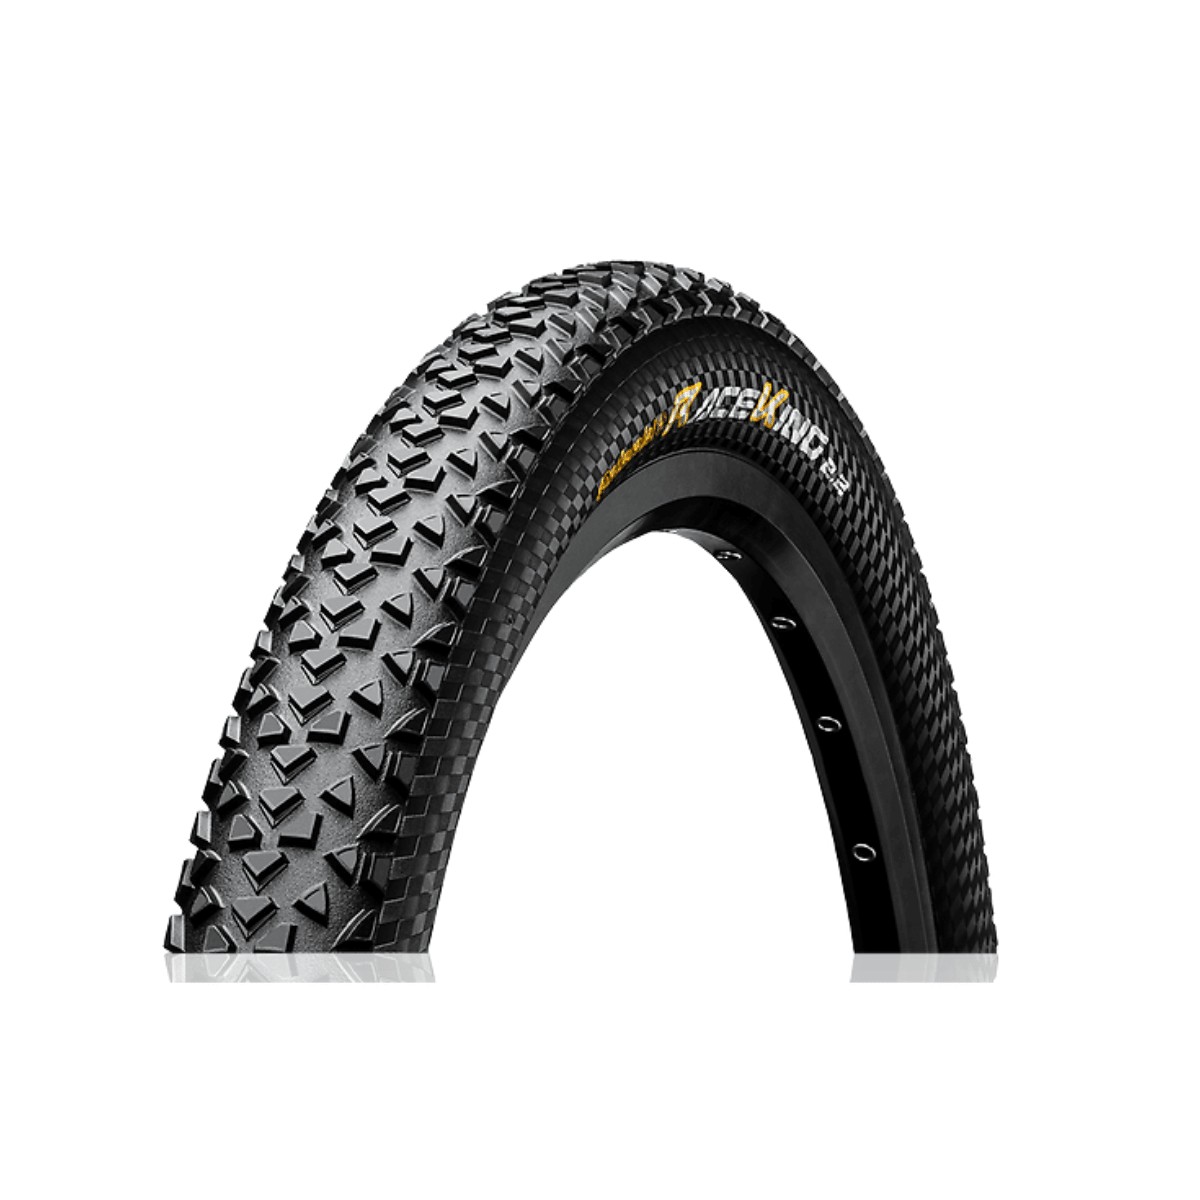 Protection günstig Kaufen-Continental Race King Protection 26, 27'5 oder 29 x 2.20 Tubeless Ready Reifen, Größe 27.5"x2.20. Continental Race King Protection 26, 27'5 oder 29 x 2.20 Tubeless Ready Reifen, Größe 27.5"x2.20 <![CDATA[Hauptmerkmale Continent